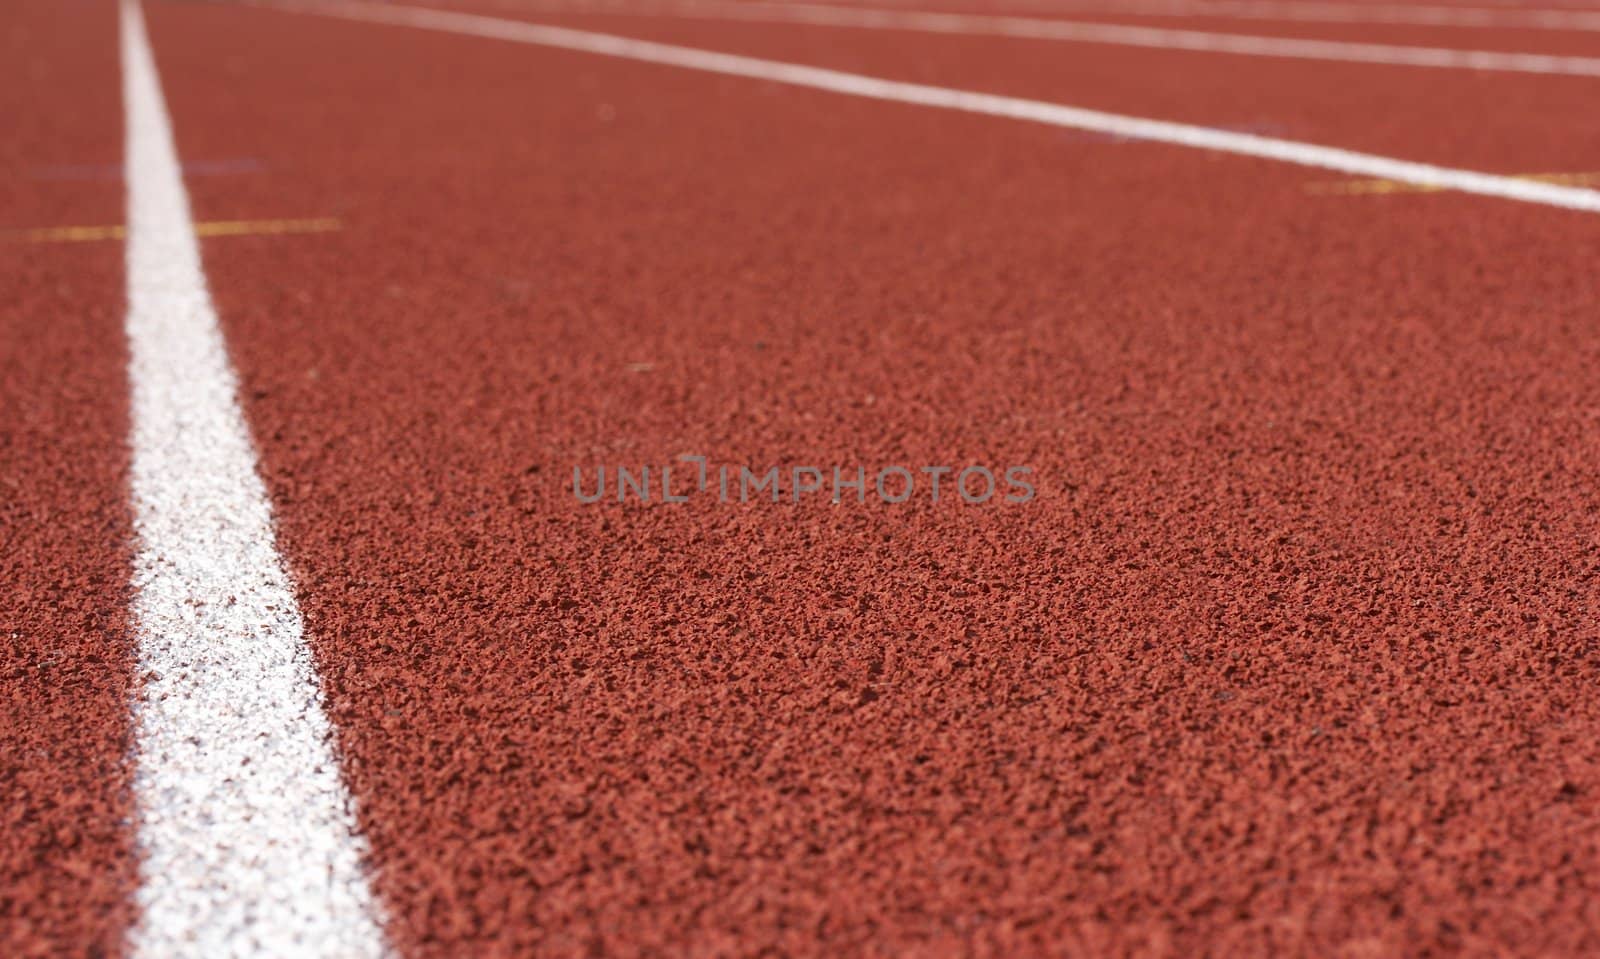 a picture of a track and field venue